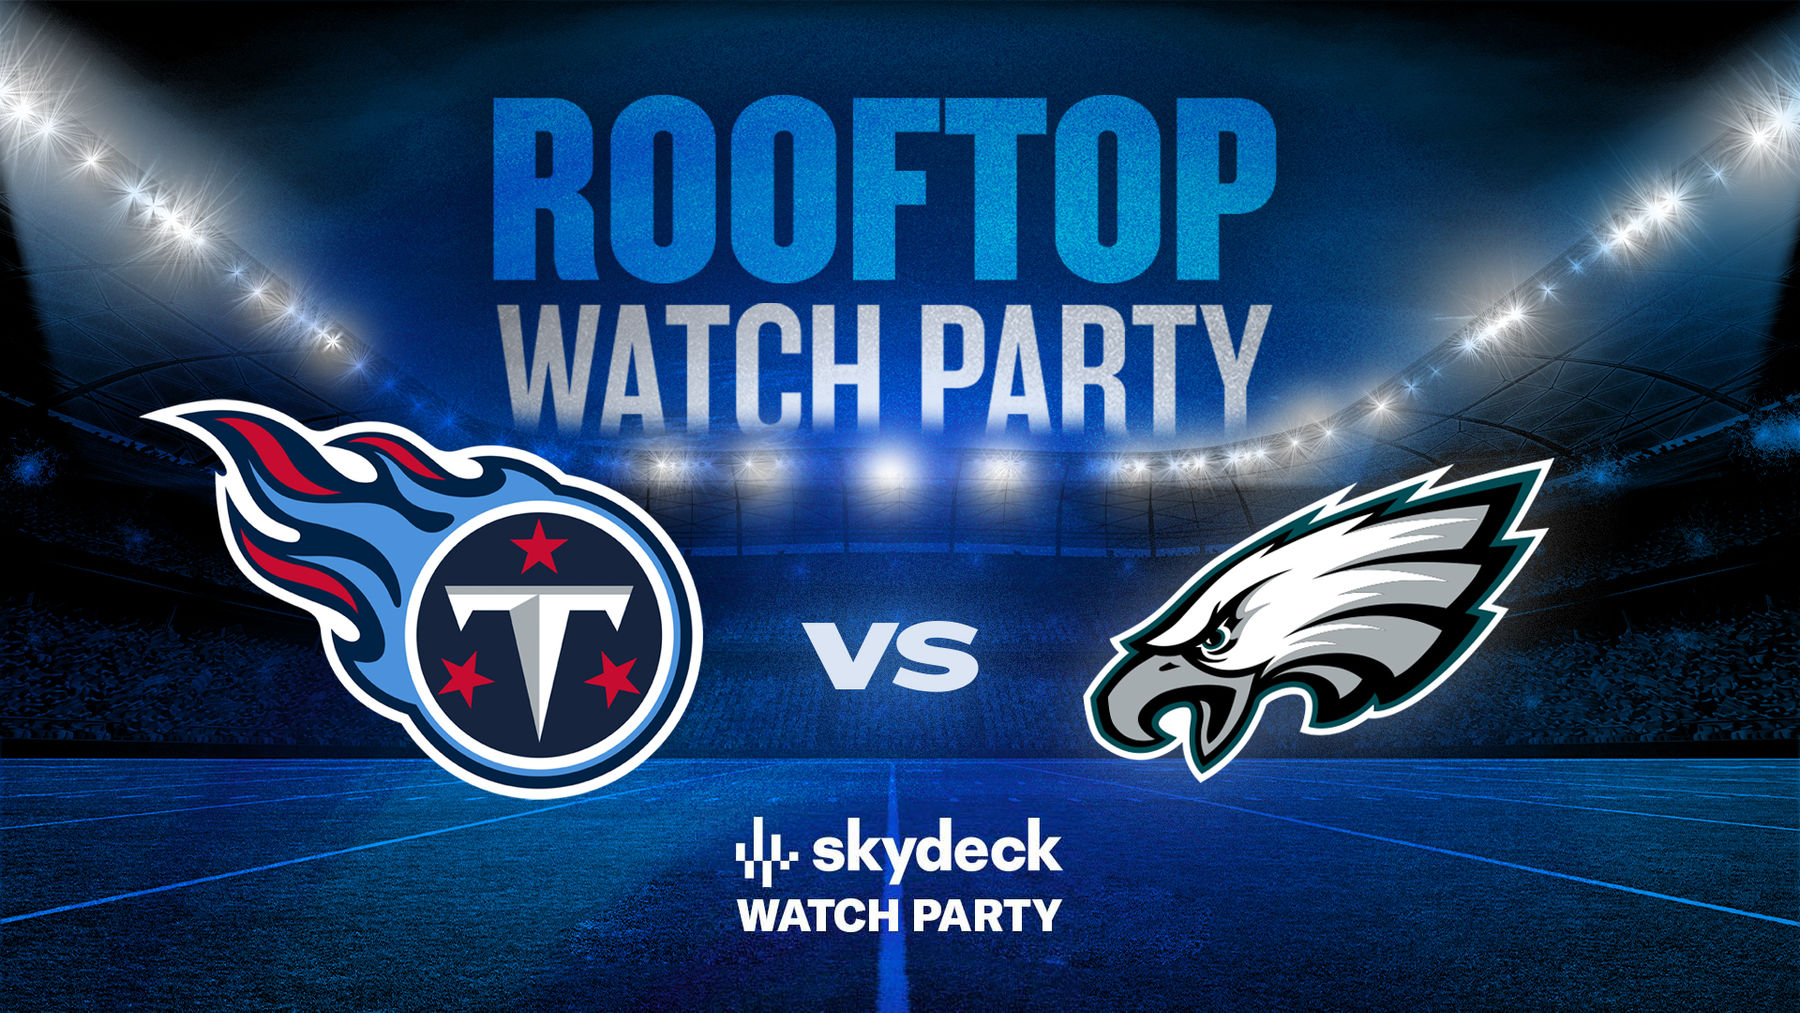 Titans vs. Eagles, Skydeck Watch Party